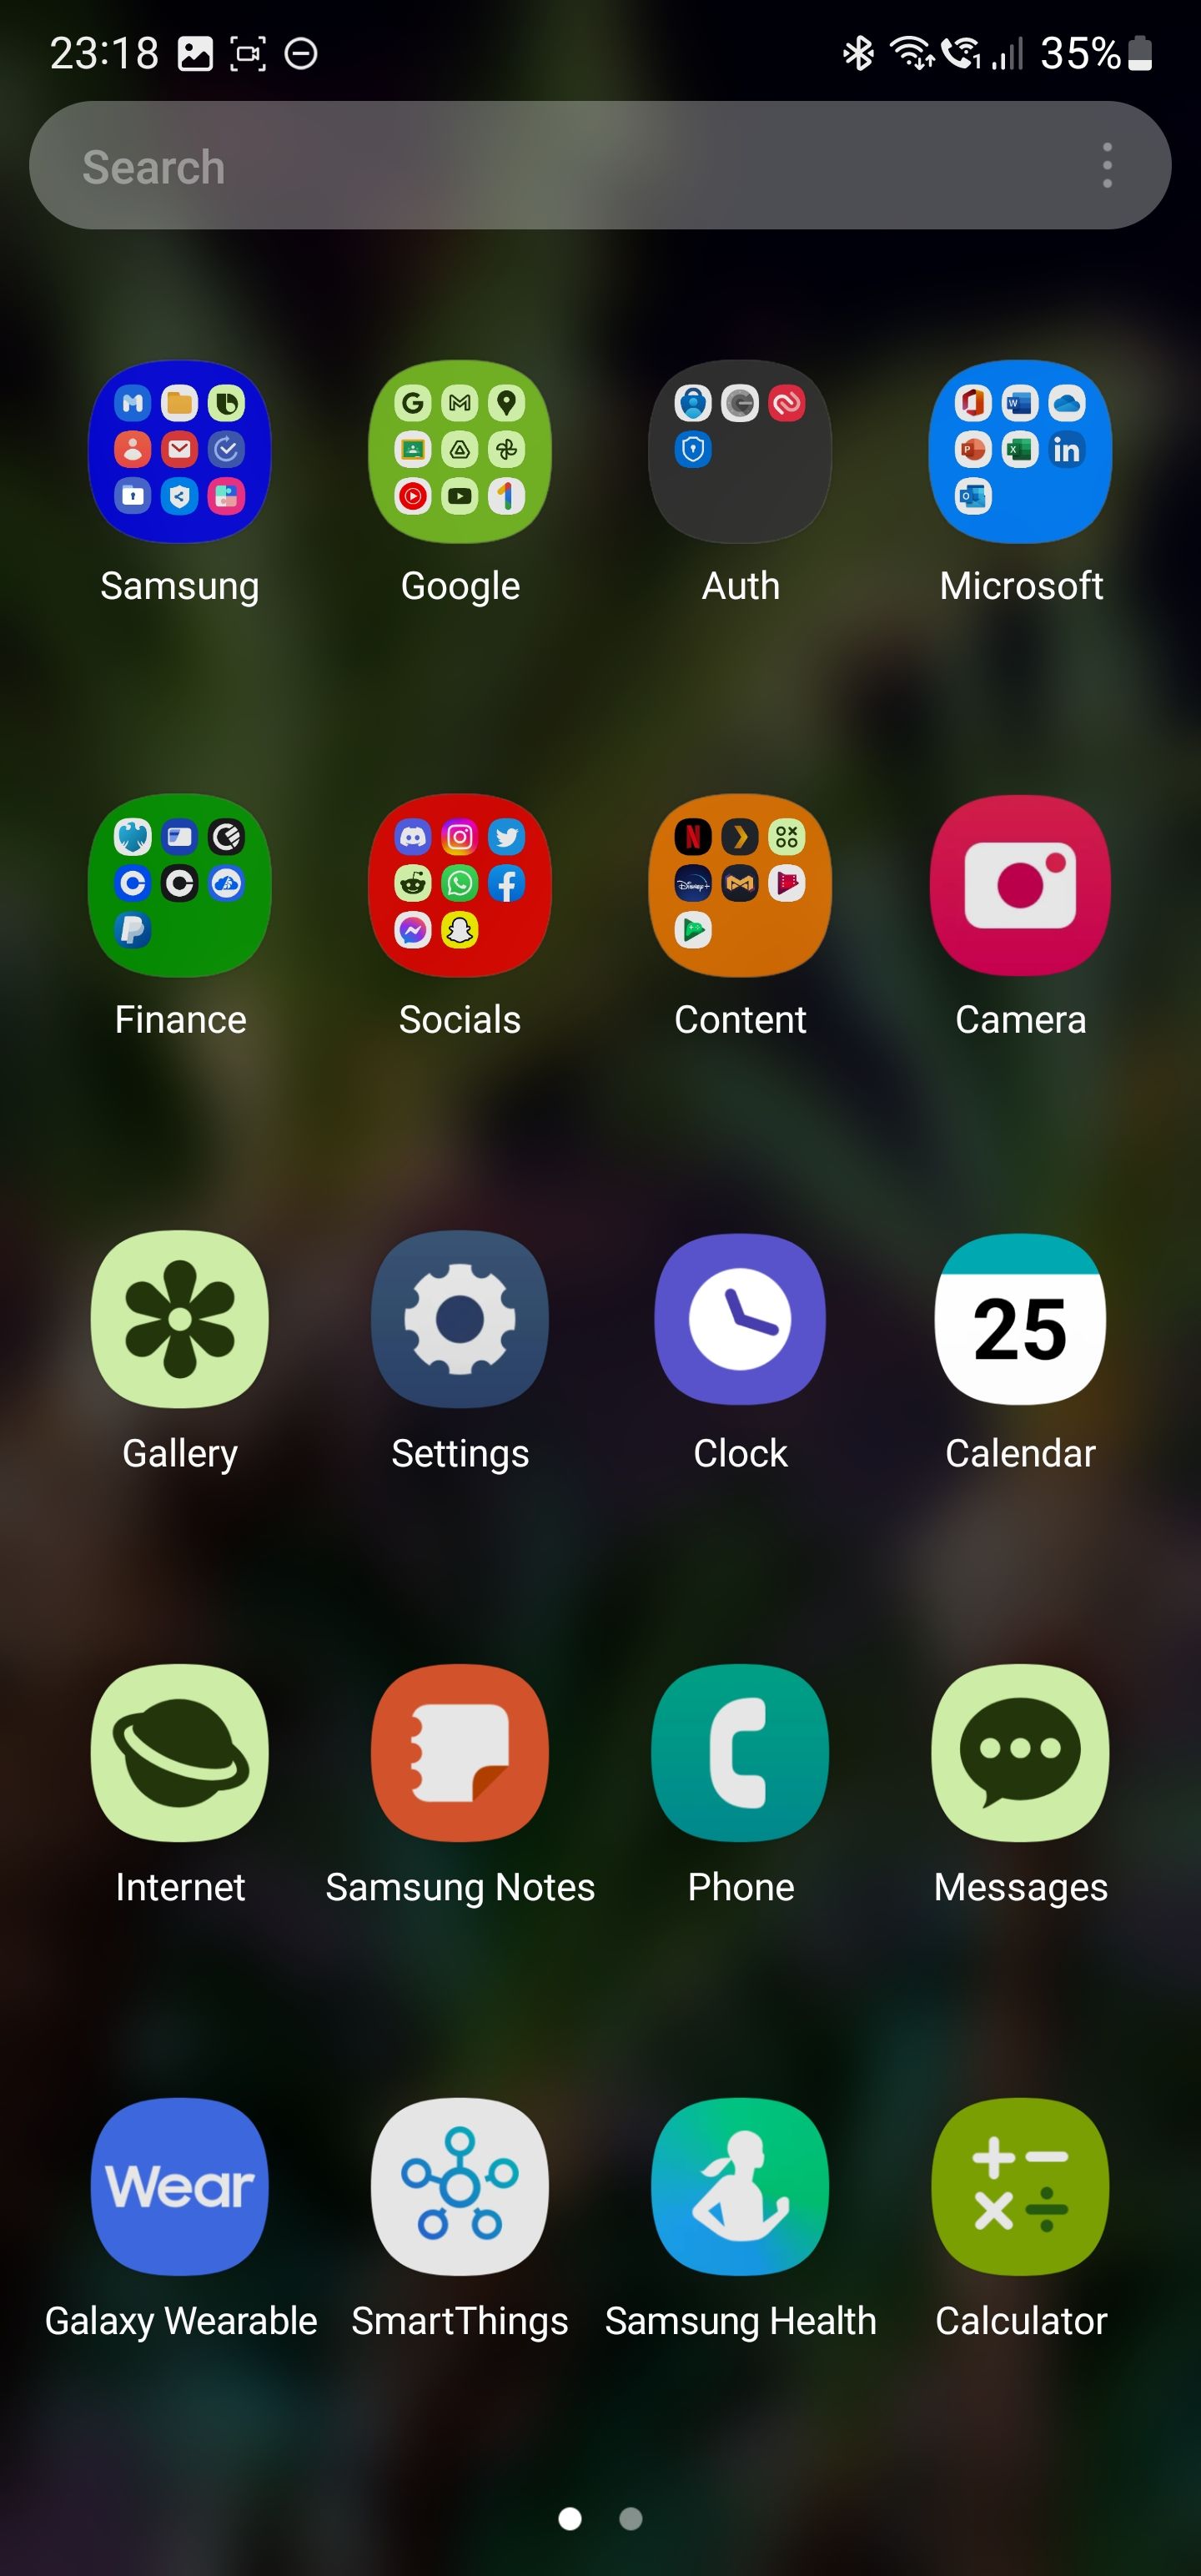 Improve themed icons support. - Samsung Community